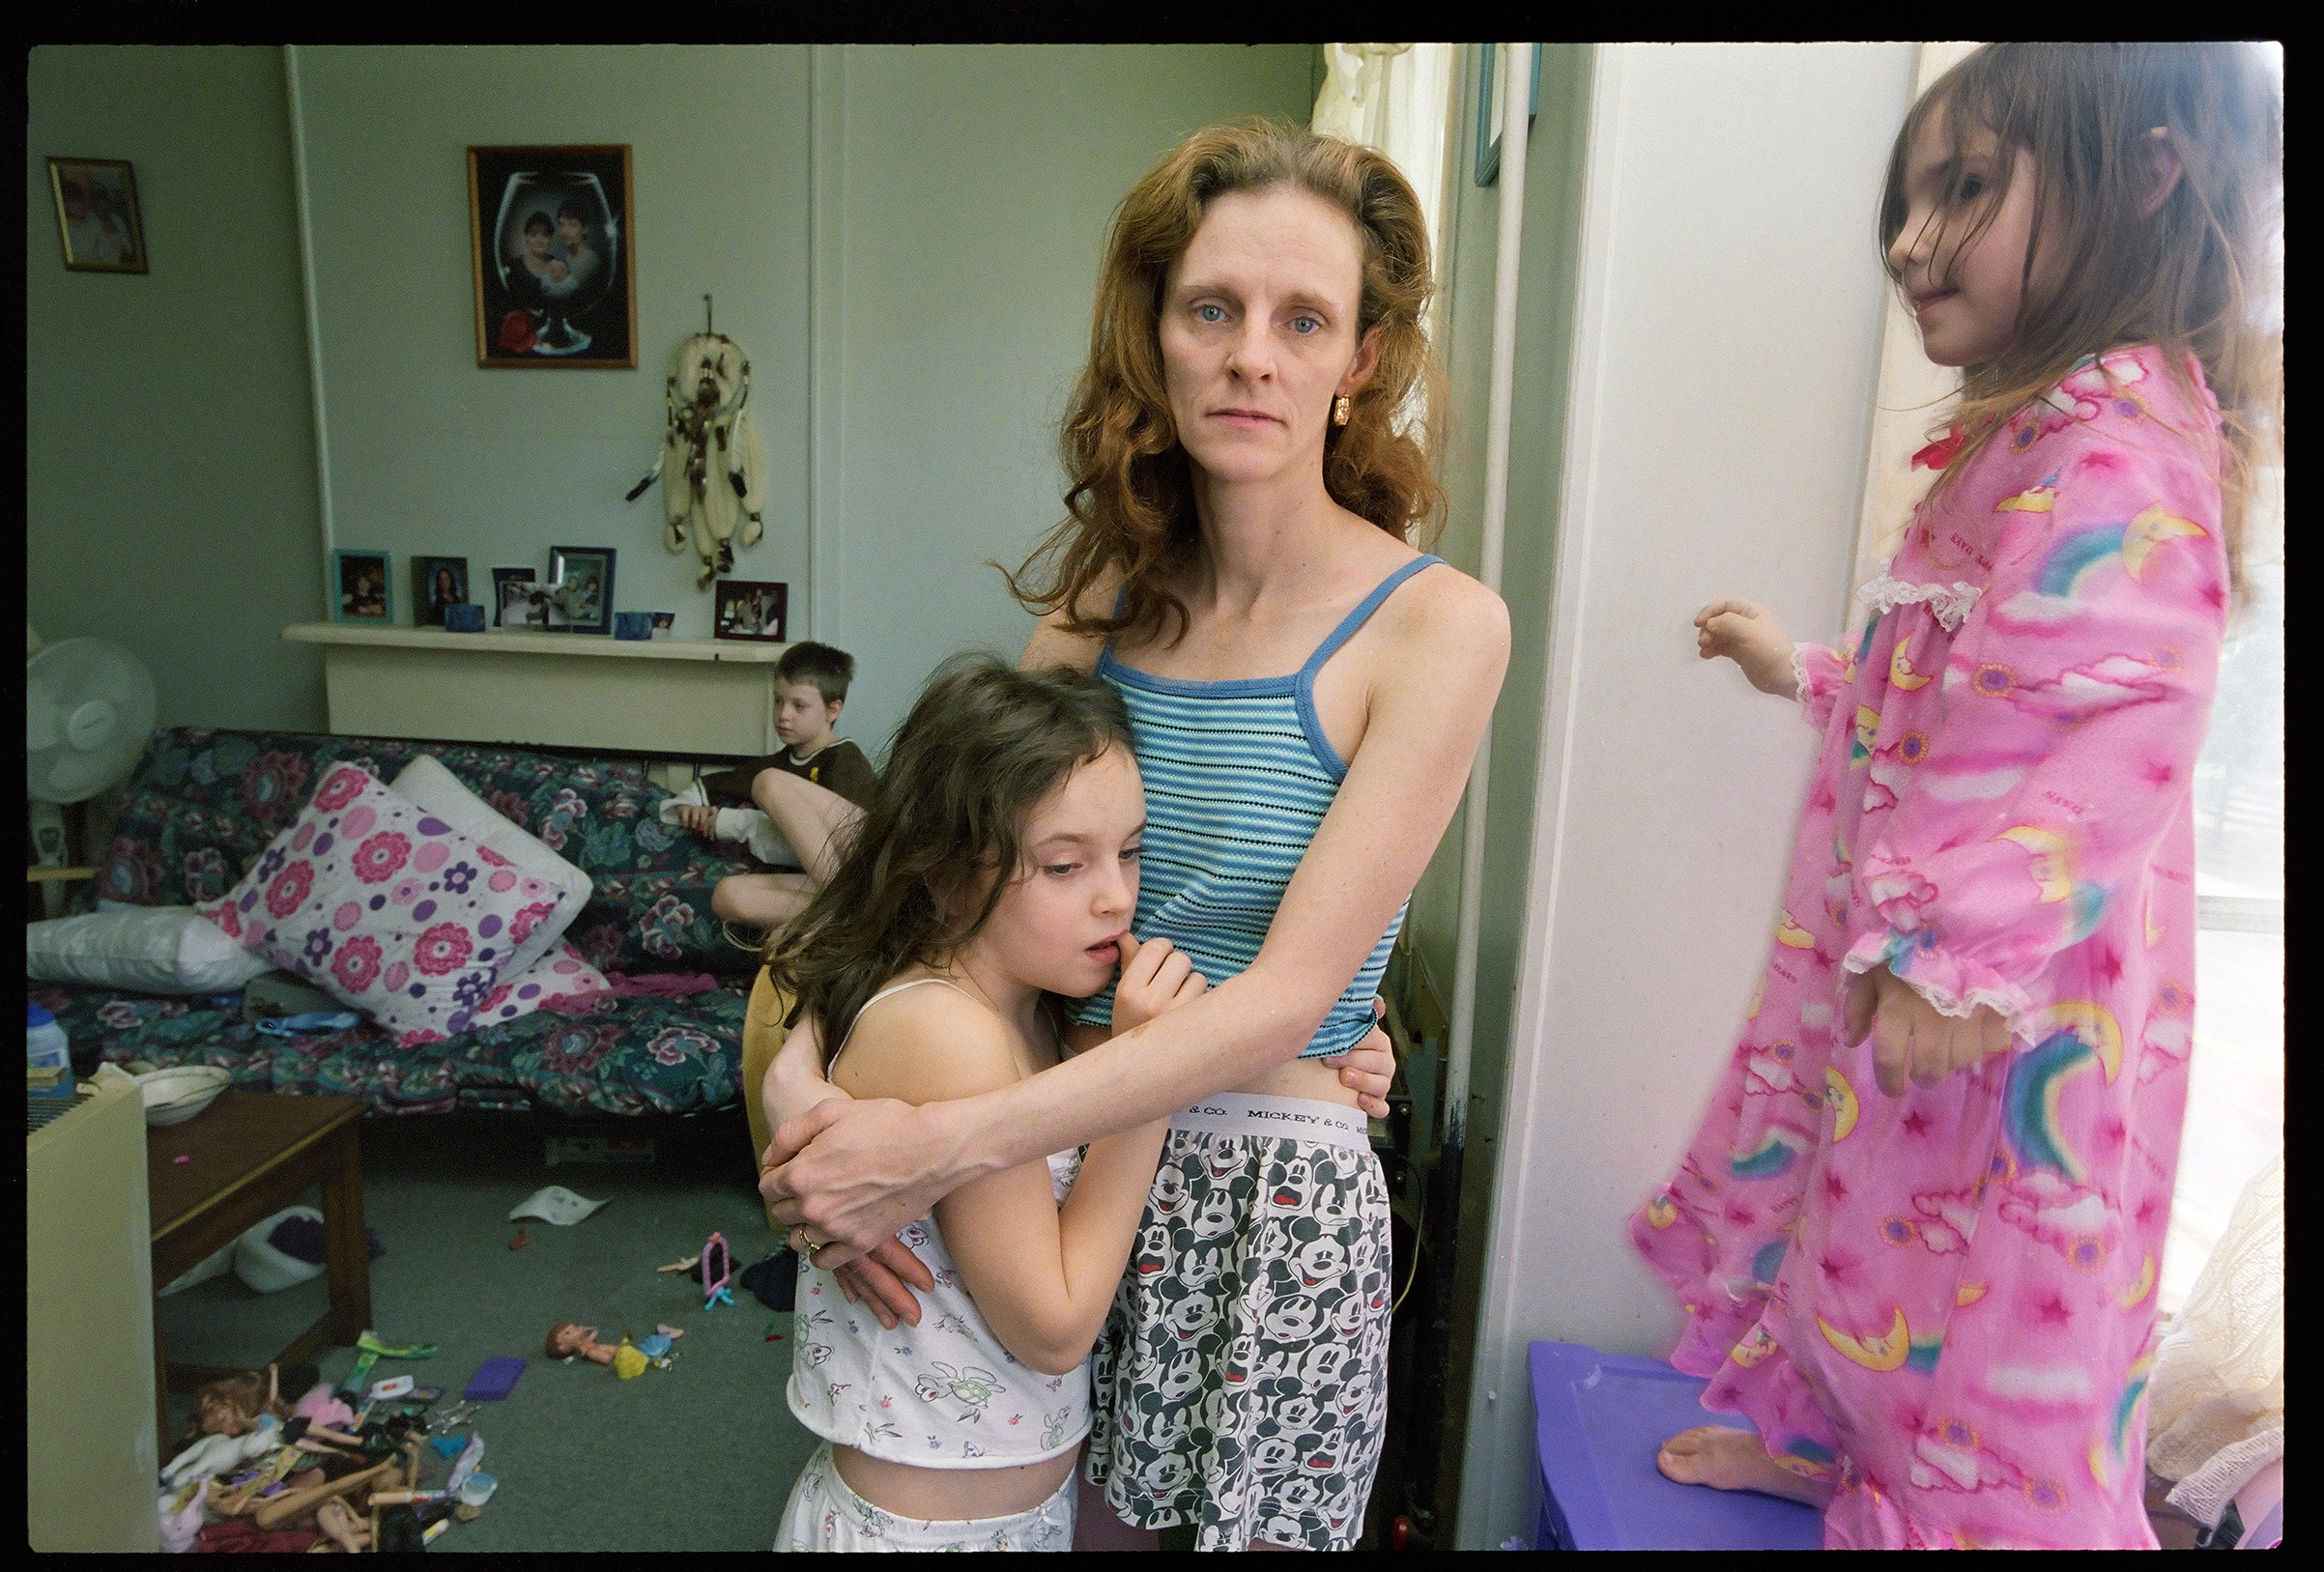 Lori Smith and her son, Darien and her daughters Megan and Katie all moved into an apartment in Debs house after they were evicted in 2006," says Kenneally. (Brenda Ann Kenneally")